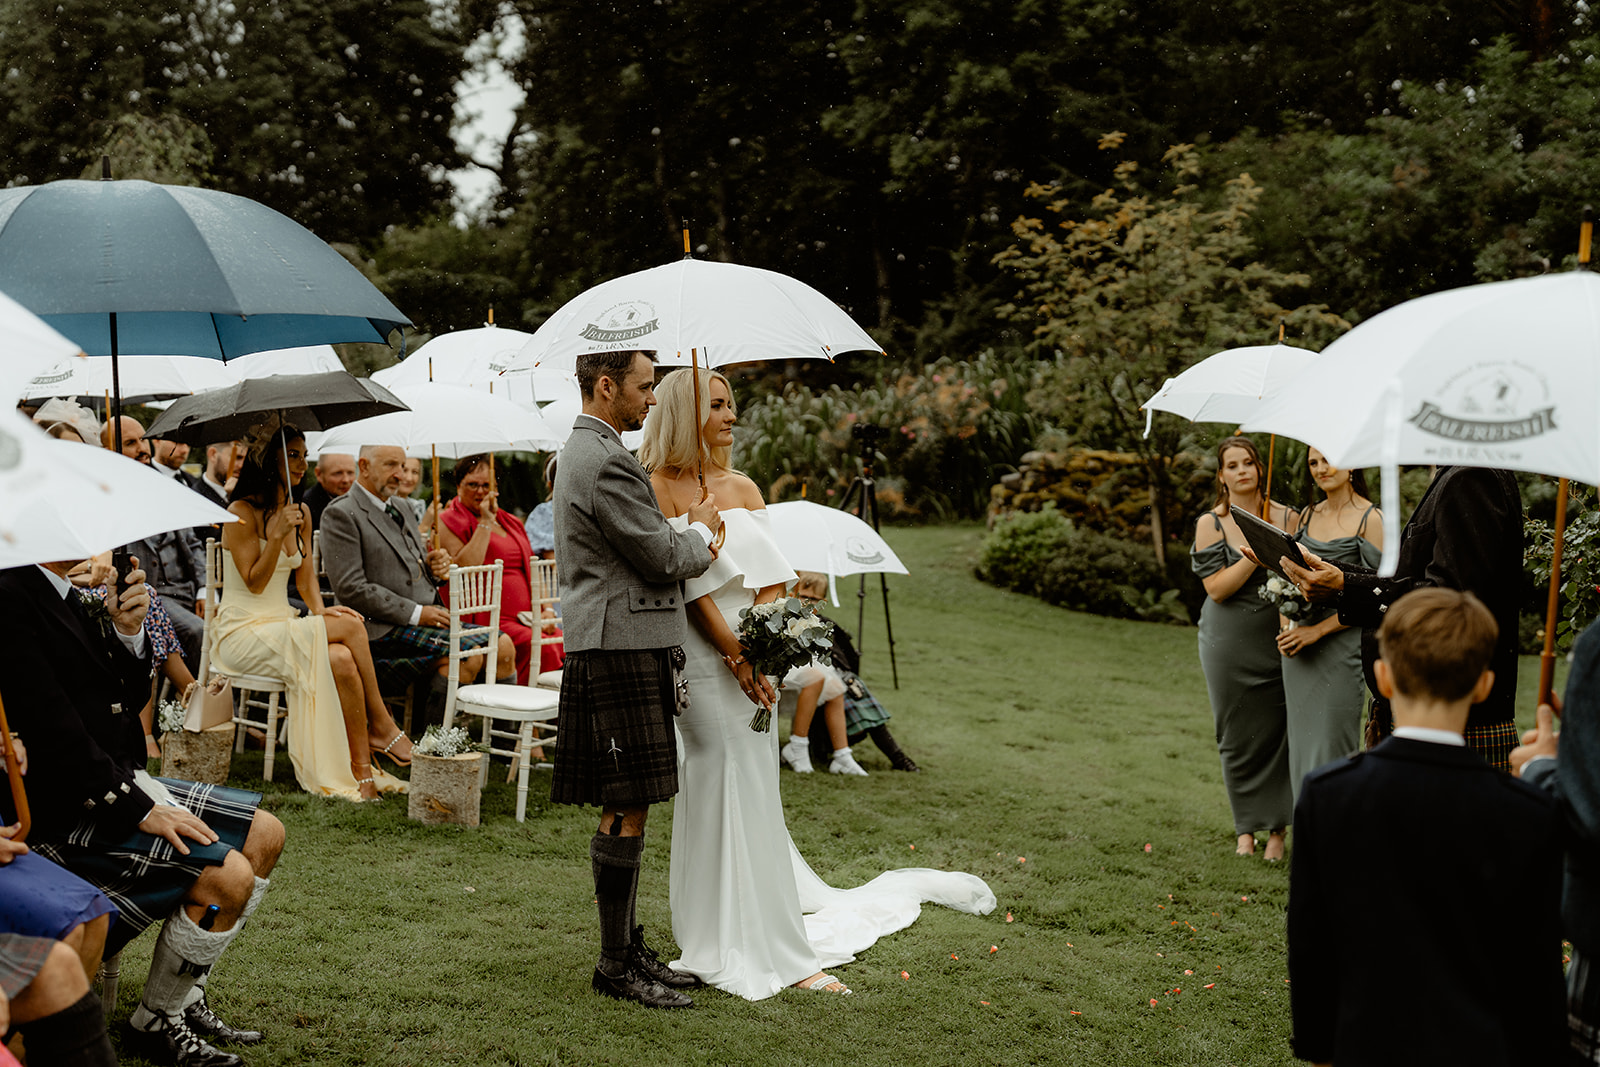 Wedding ceremony in the rain with everyone taking shelter underneath umbrellas